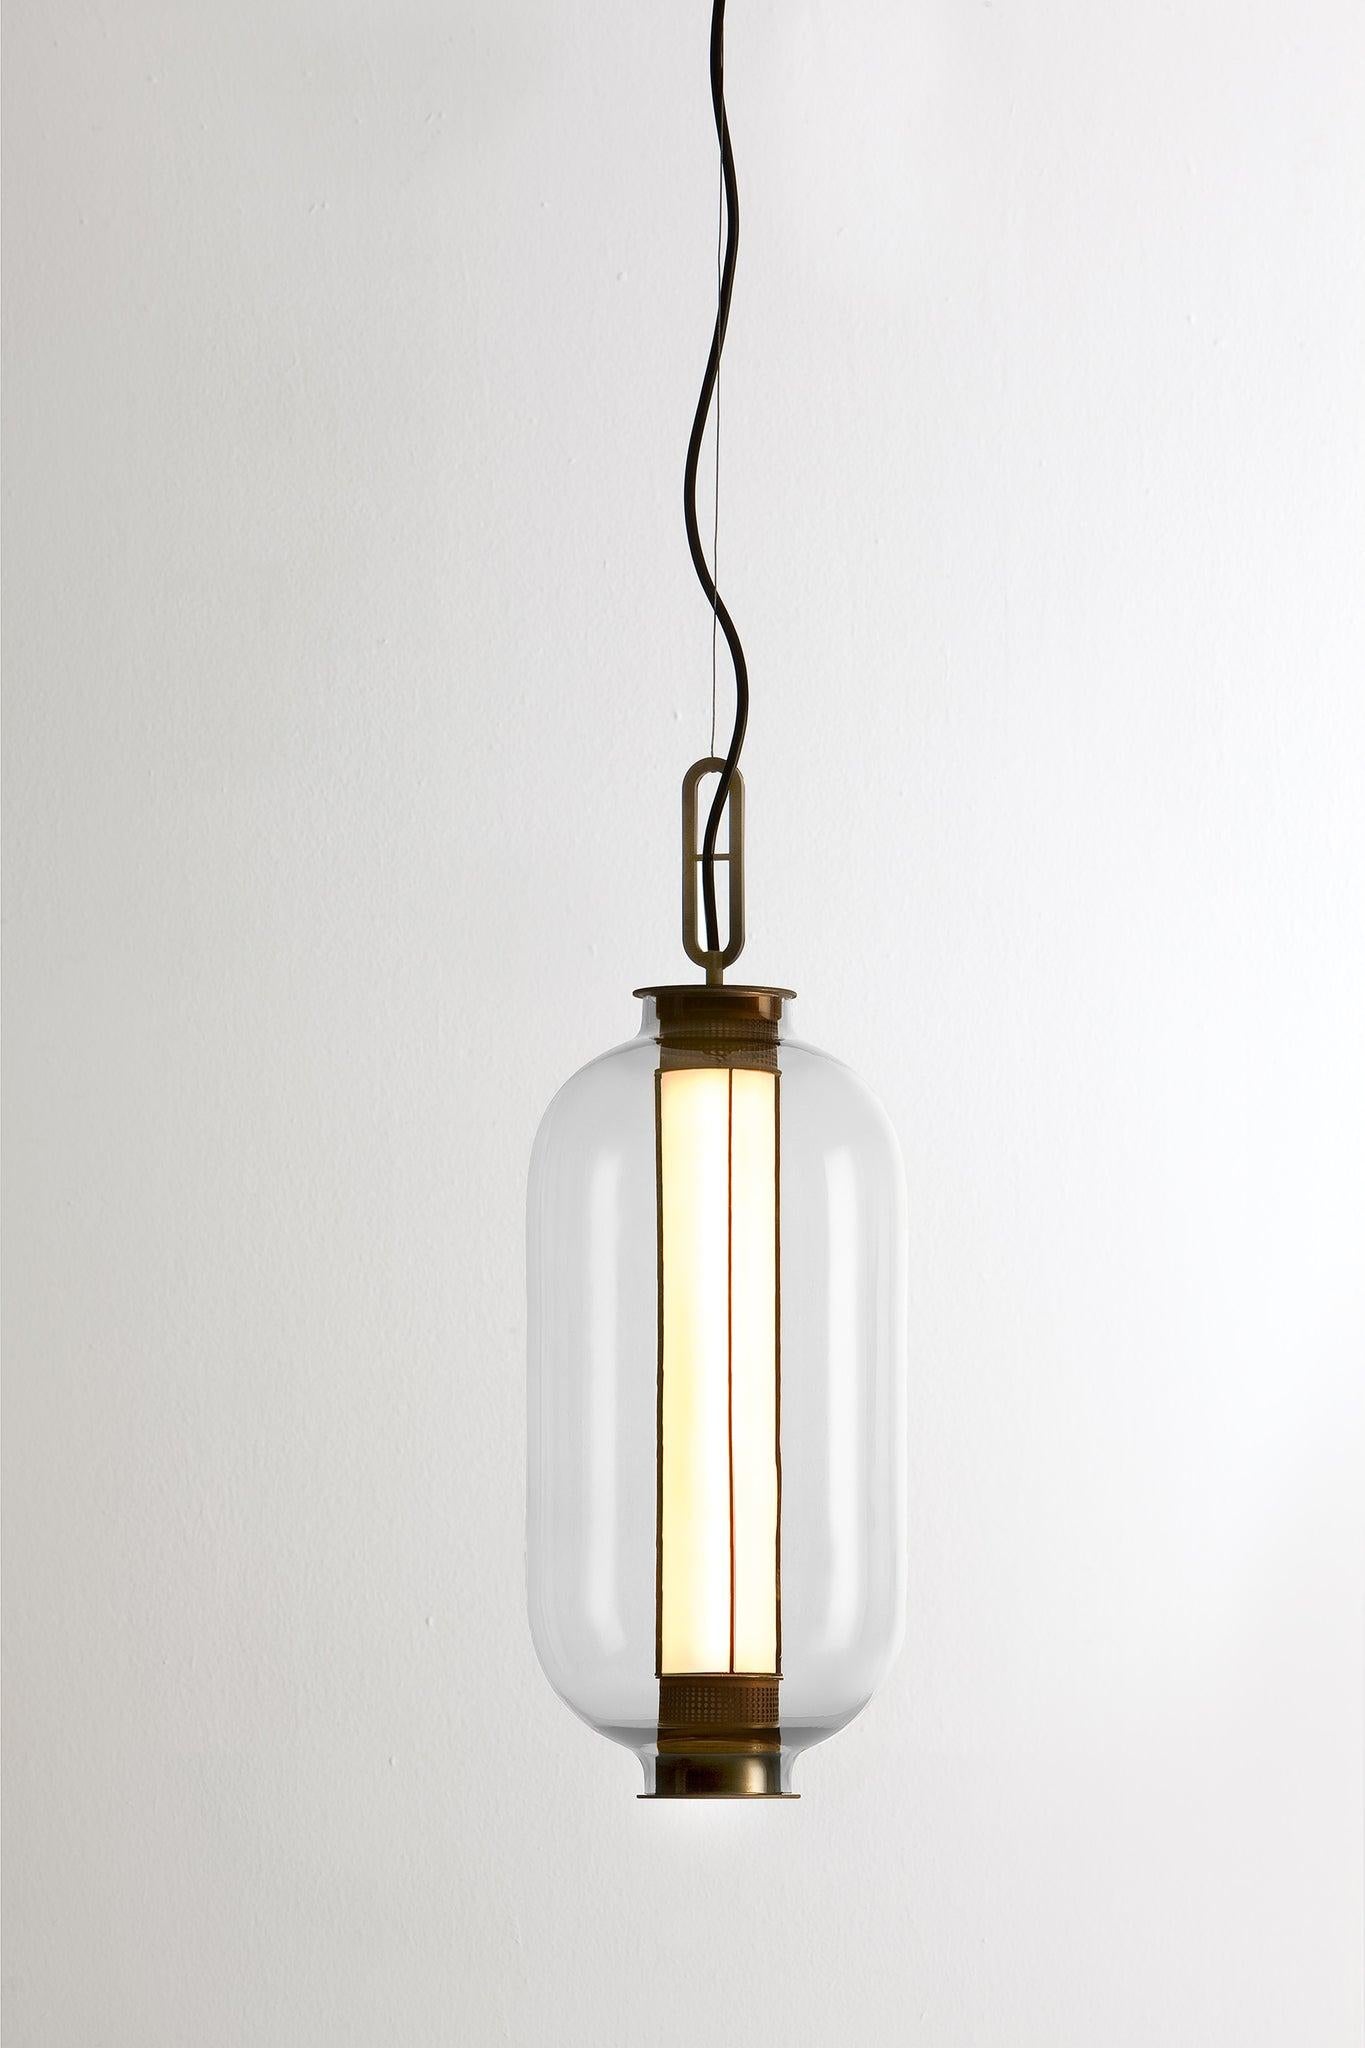 BAI T BA BA - Outdoor 

Suspension lamp, model BAI T BA BA Outdoor, designed by Neri & Hu in 2014. 
Manufactured by Parachilna. 

This collection is inspired by traditional Chinese lanterns. This version however, is a sophisticated one. Made of an